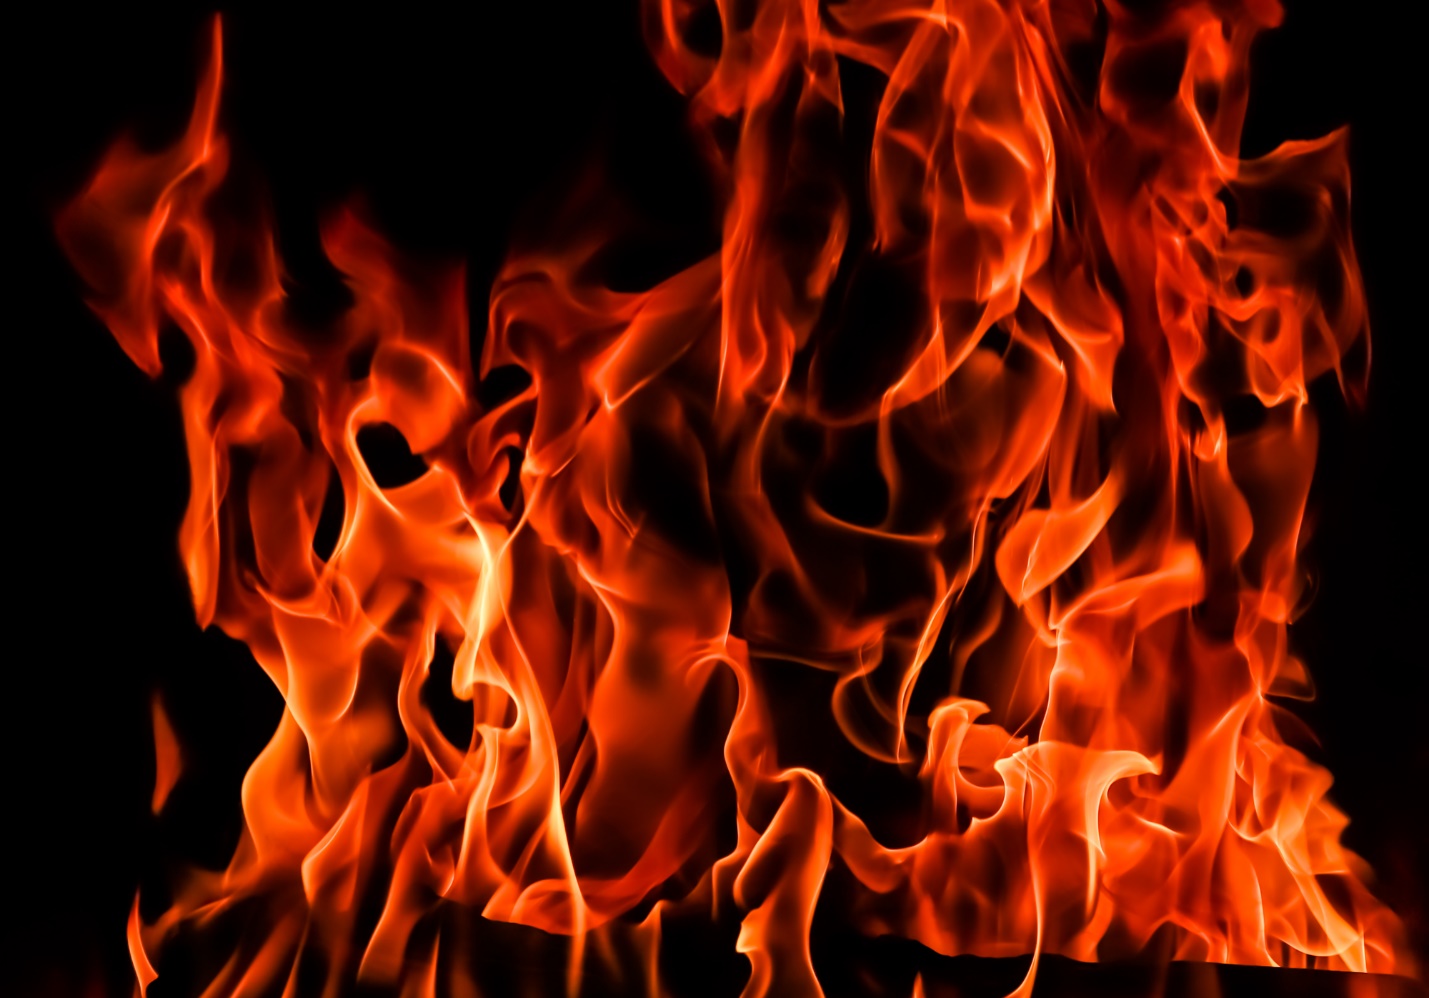 A close-up of a fire

Description automatically generated with medium confidence